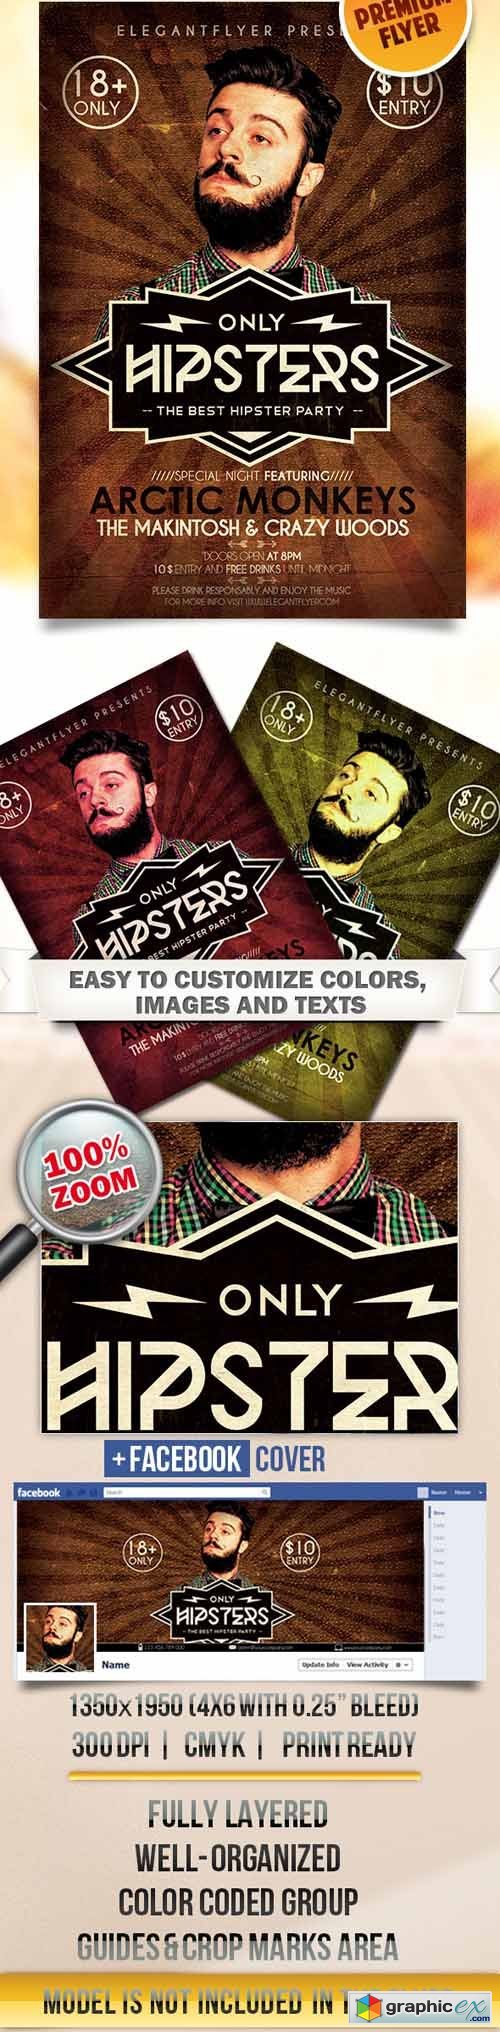 Hipster � Flyer PSD Template + Facebook Cover